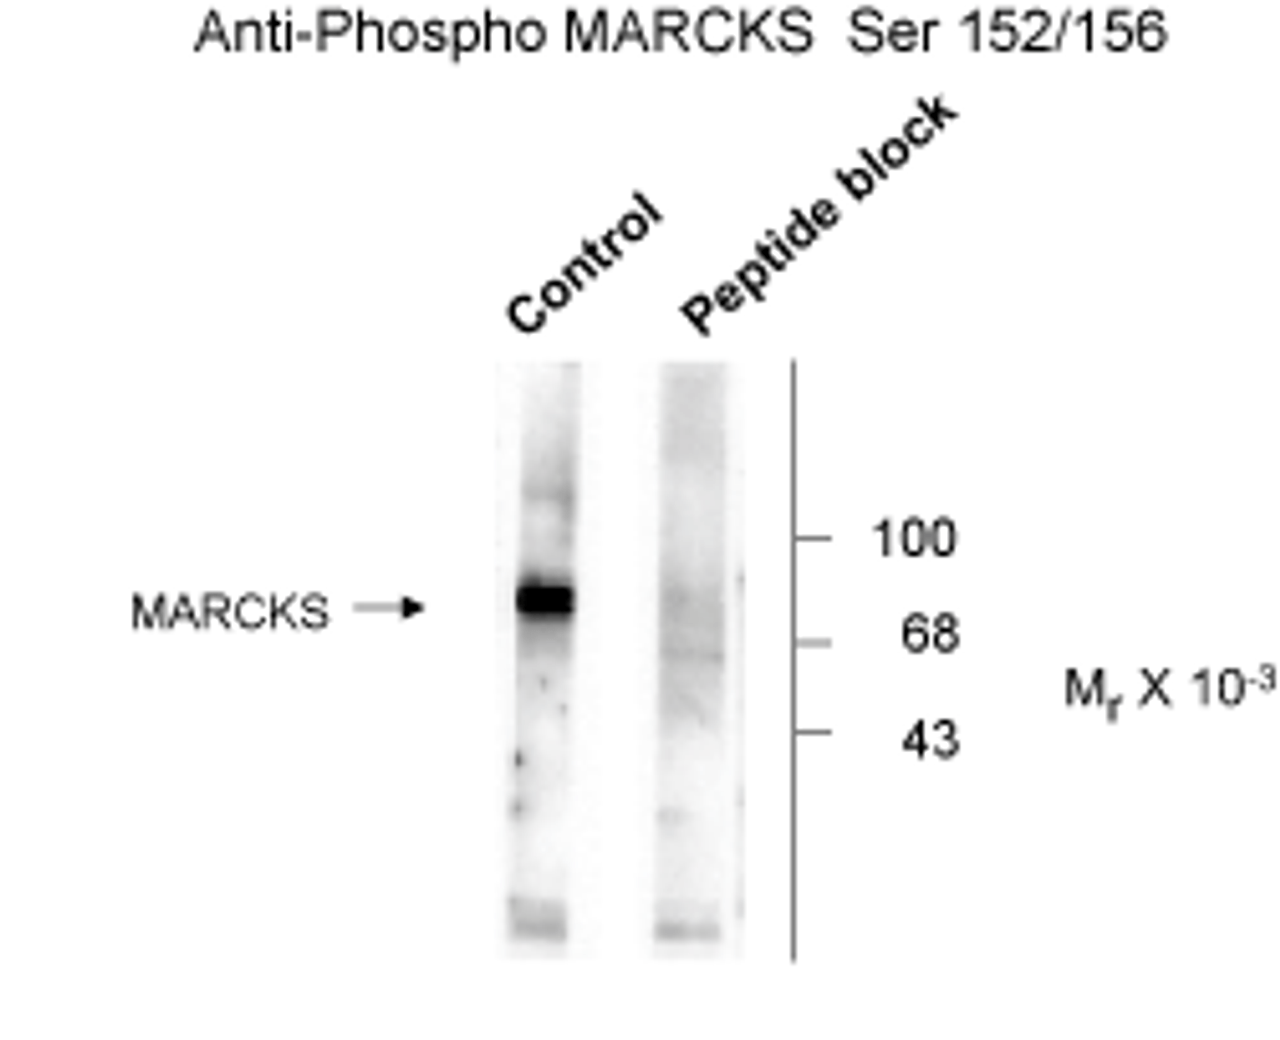 Western blot of rat brain lysate showing phospho-specific immunolabeling of the ~87k MARCKS protein.